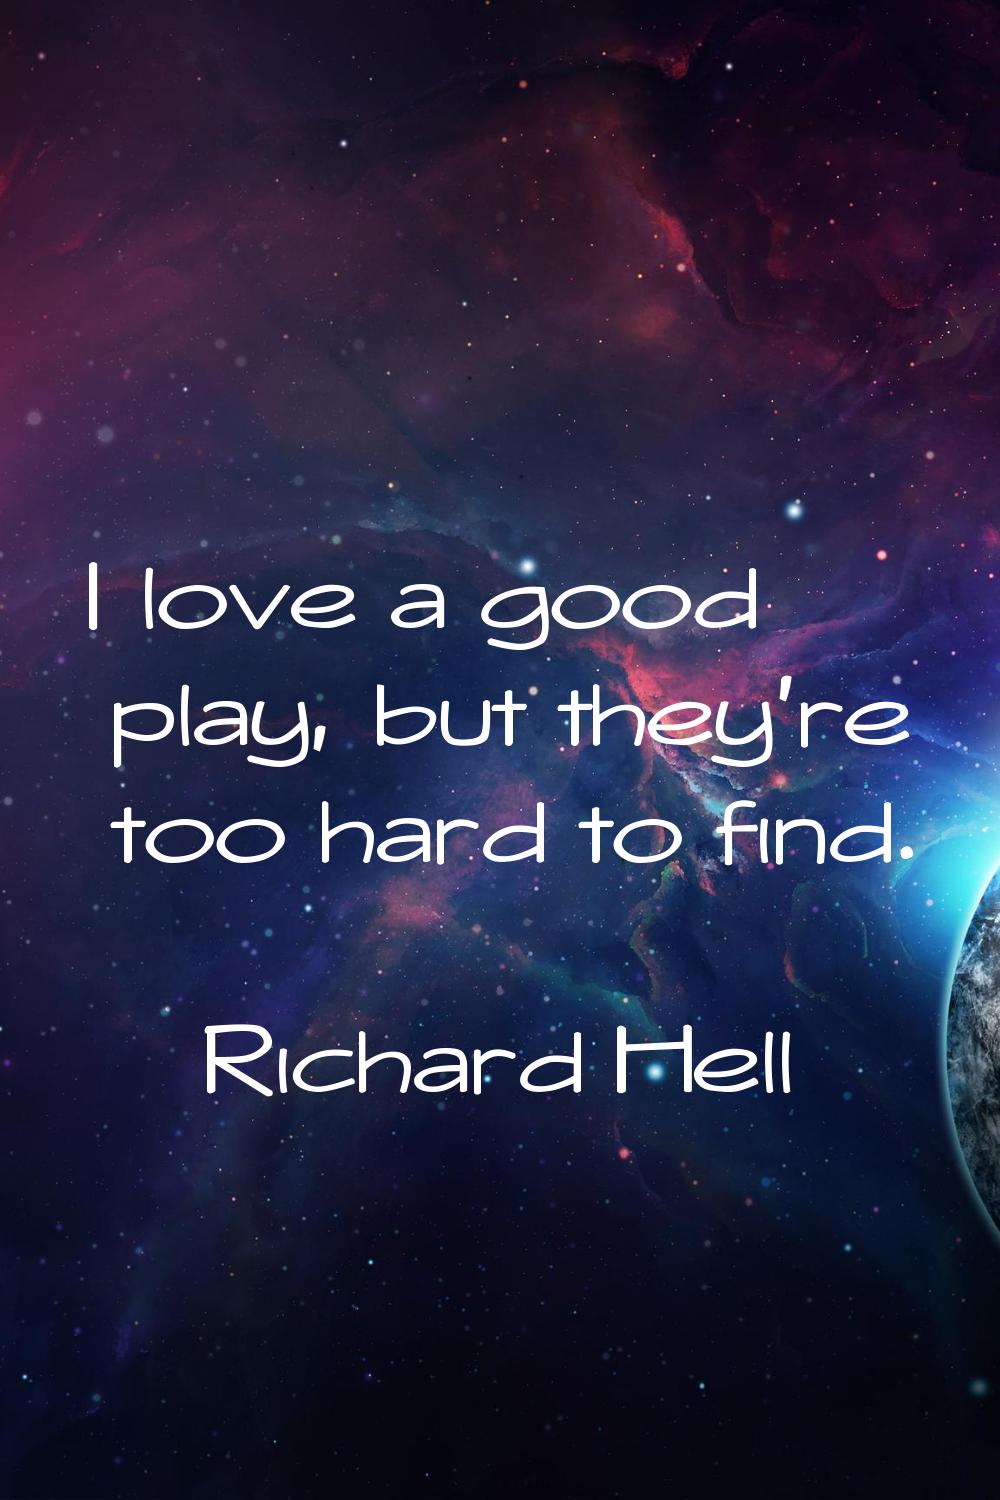 I love a good play, but they're too hard to find.